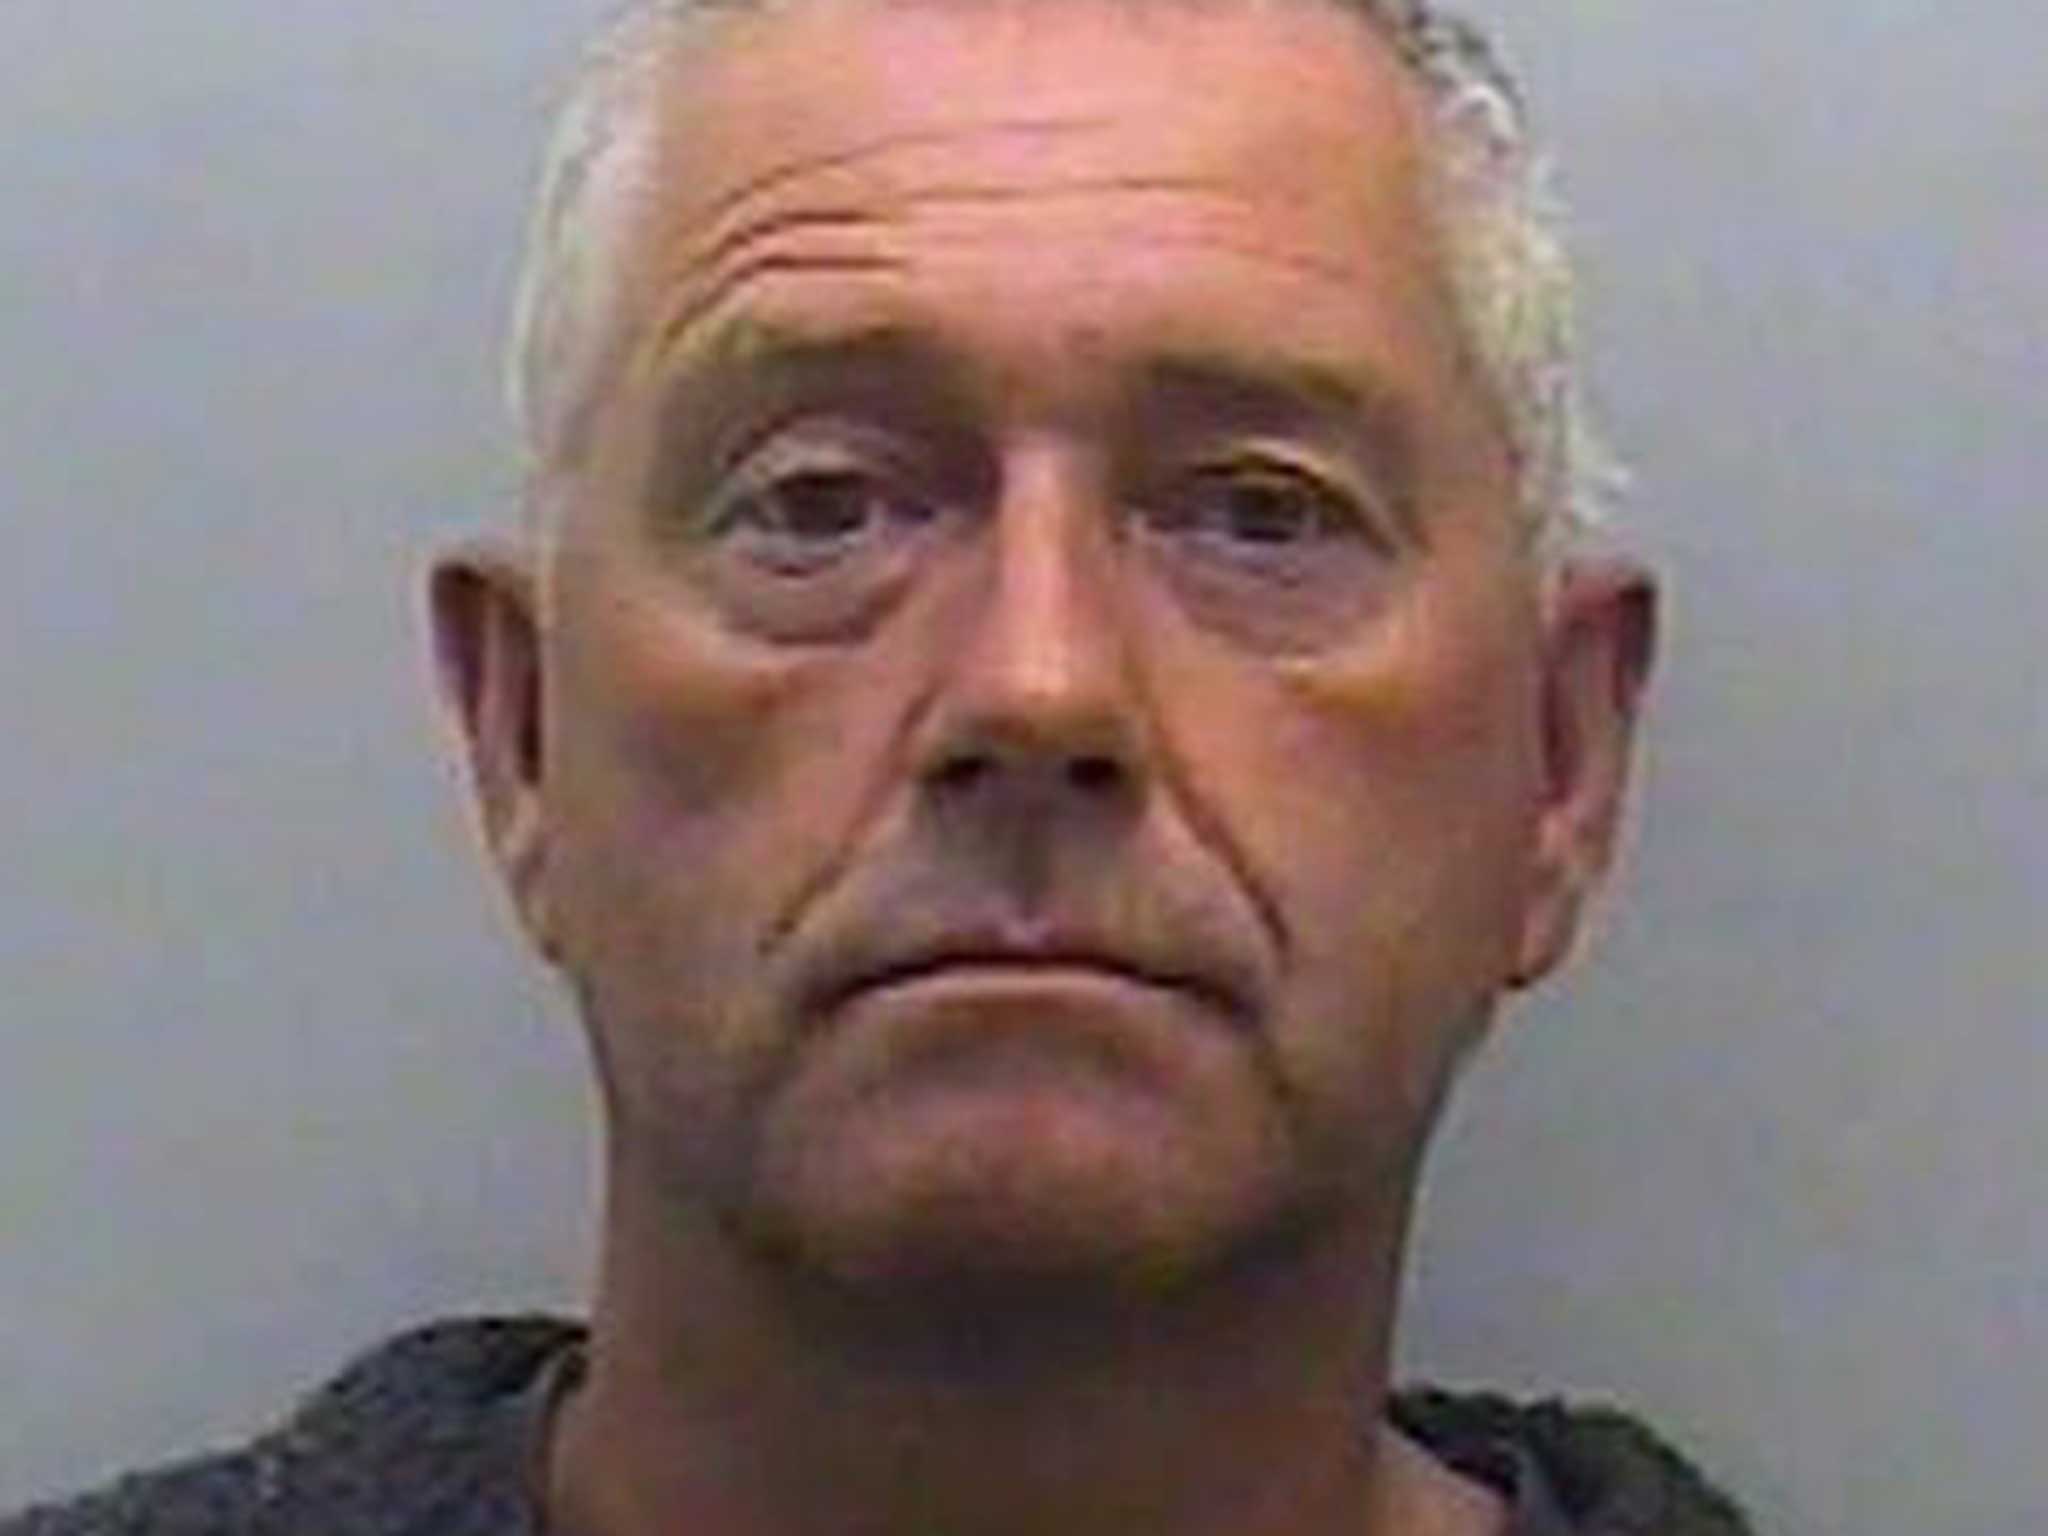 Thomson-Glover has been jailed for three years and nine months